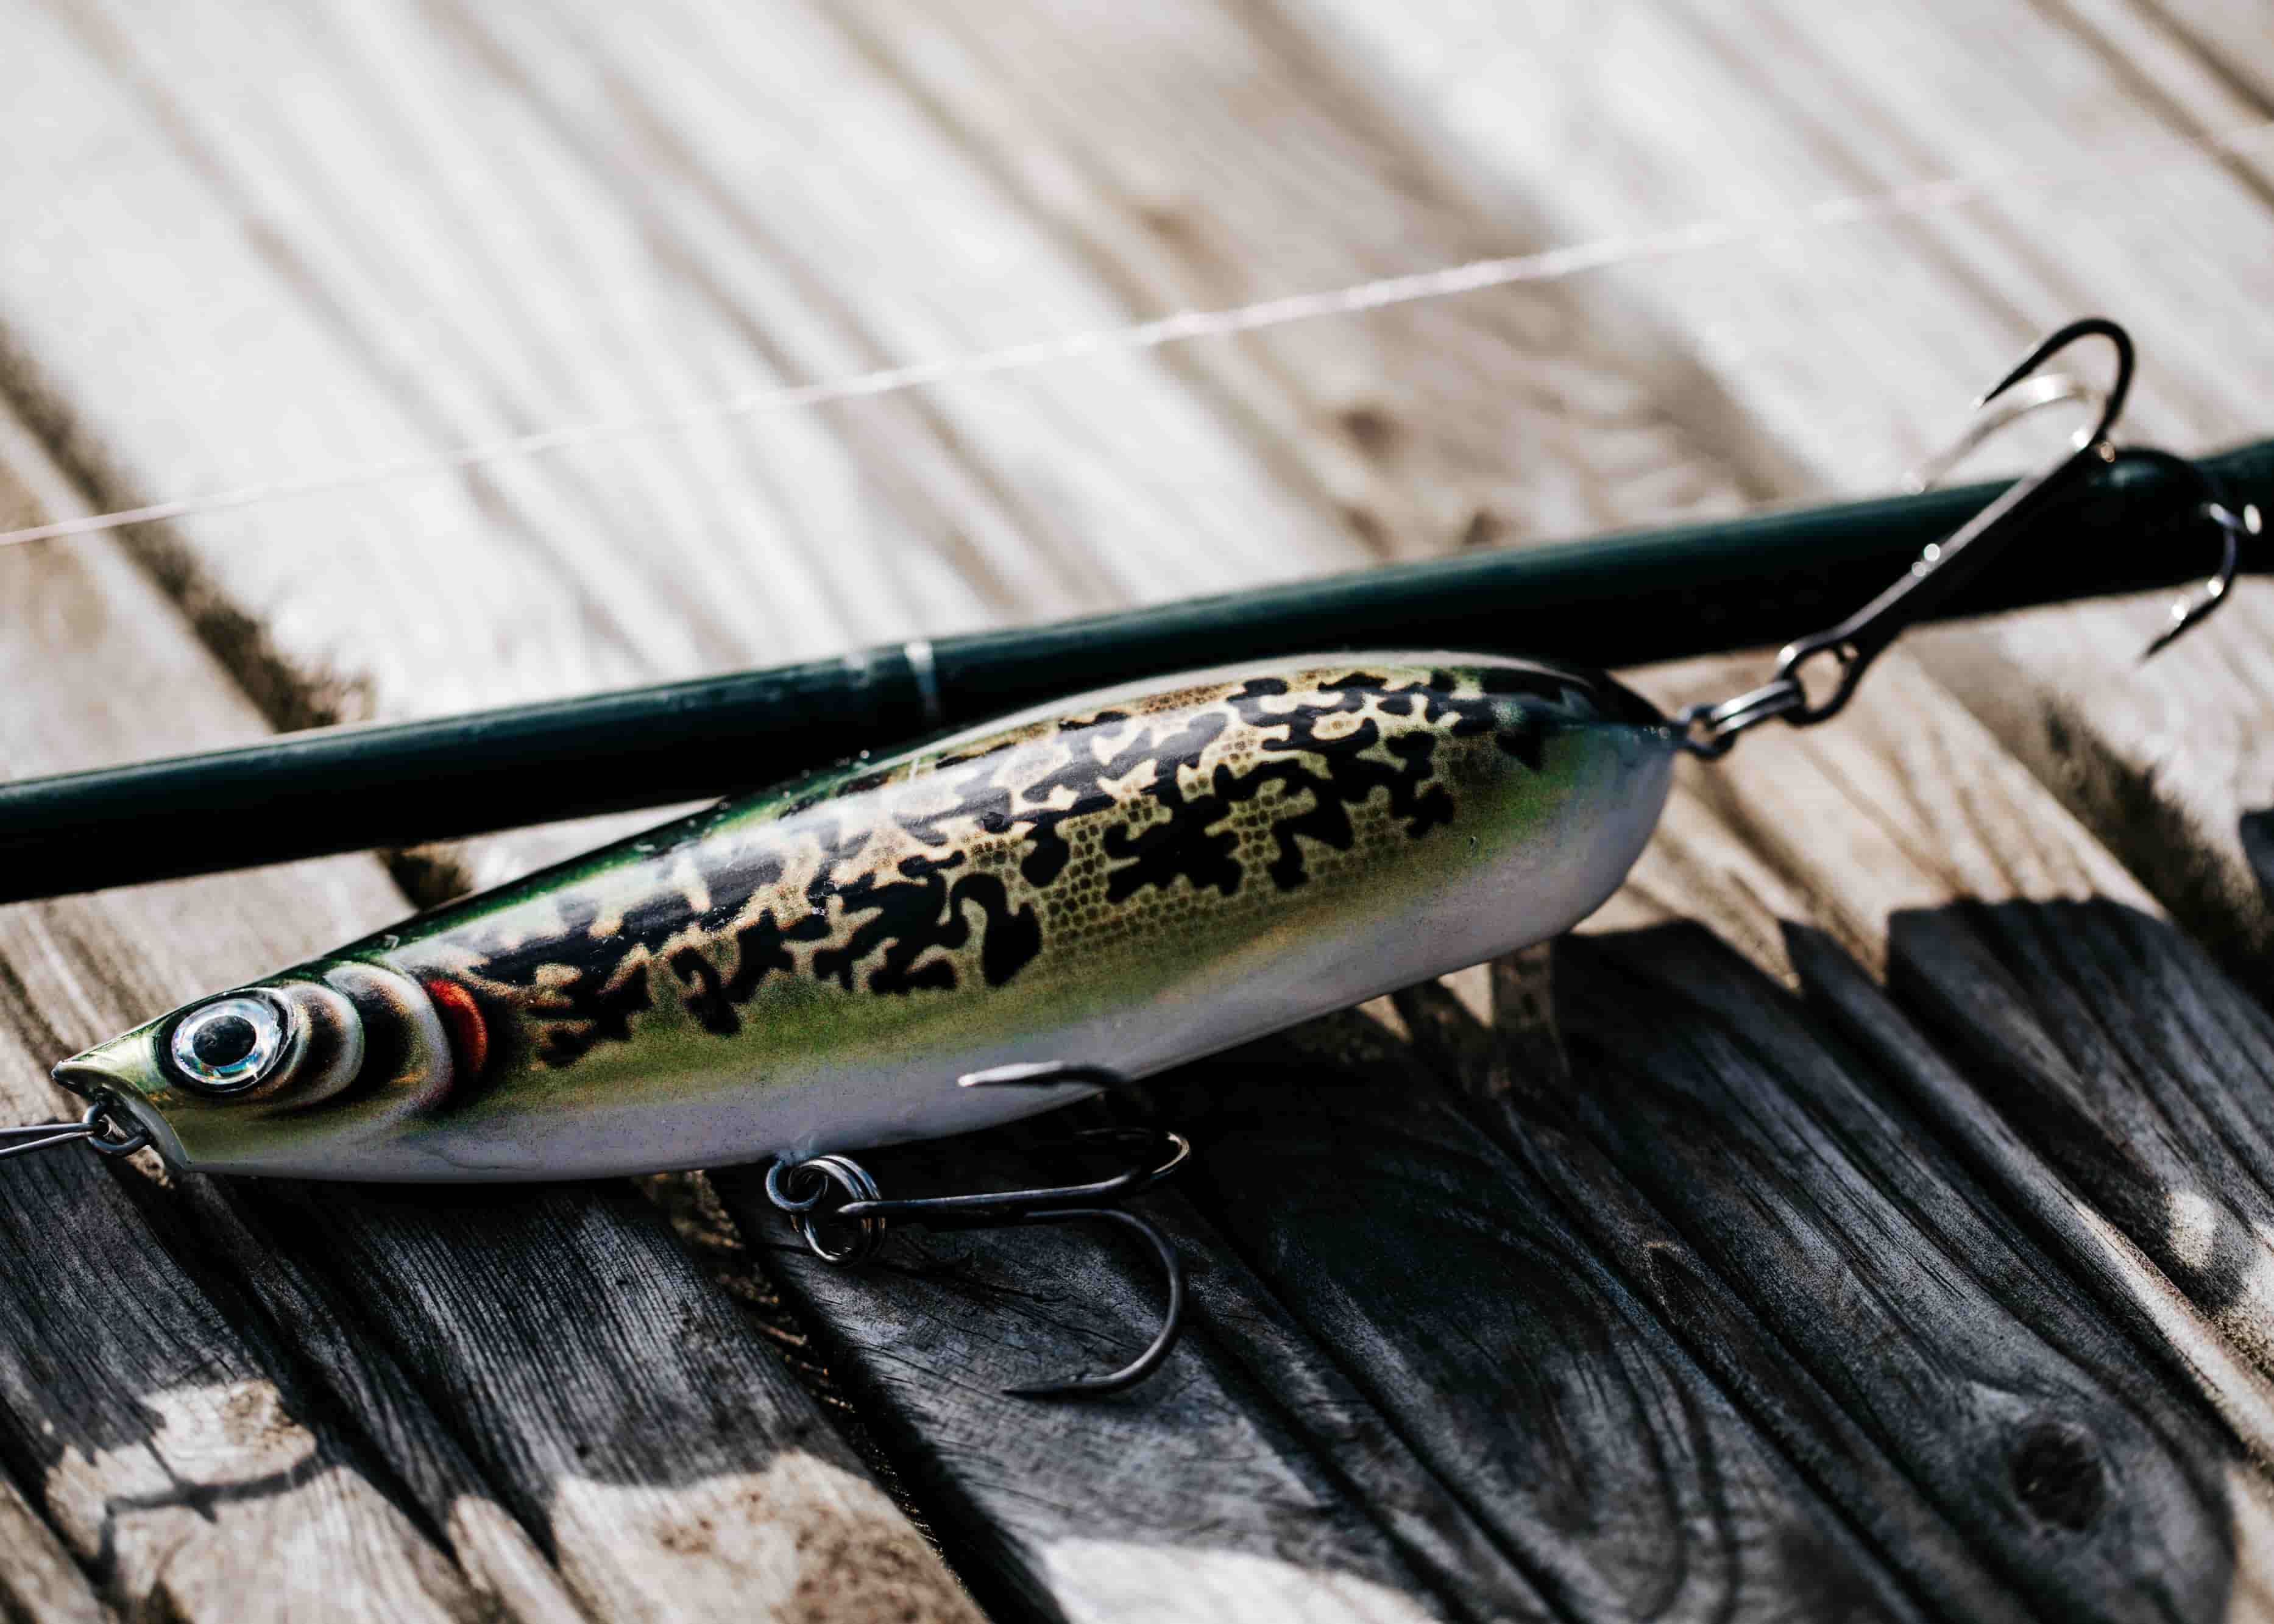 Pike or barramundi? Rapala's innovative lures attract fish and